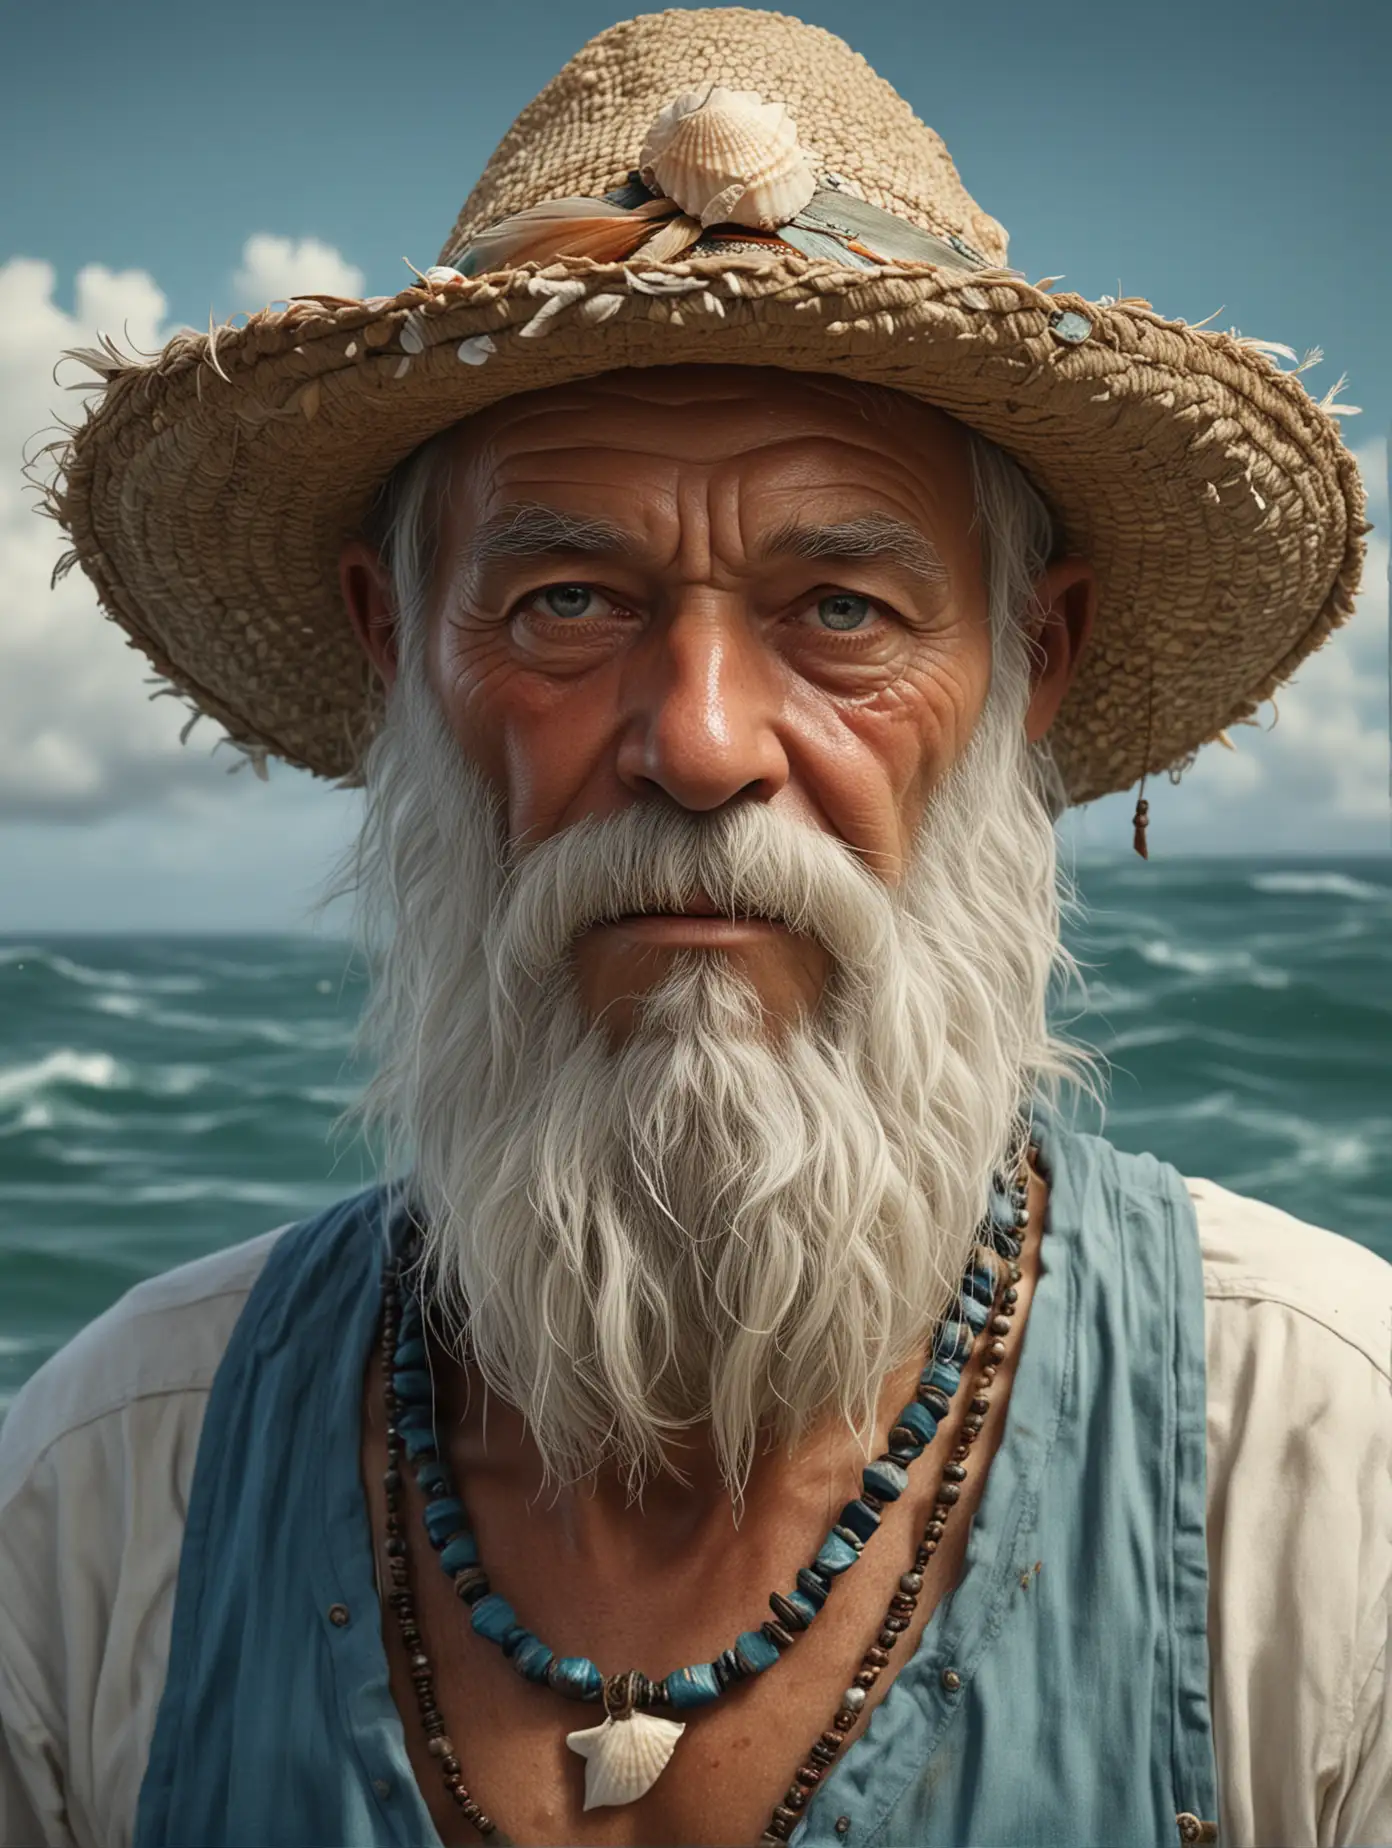 a close up of Santiago, from The Old Man and the Sea, a book by Ernest Hemingway, a very old gaunt Columbian fisherman, lost in his long struggle to catch a giant marlin, with a long white beard and a cyan bucket hat, white shirt, necklaces made from tropical seashells and feathers,  seascape background, a hyperrealistic painting inspired by lee jeffries, zbrush central contest winner, hyperrealism, steven mccurry portrait, photography alexey gurylev, alessio albi